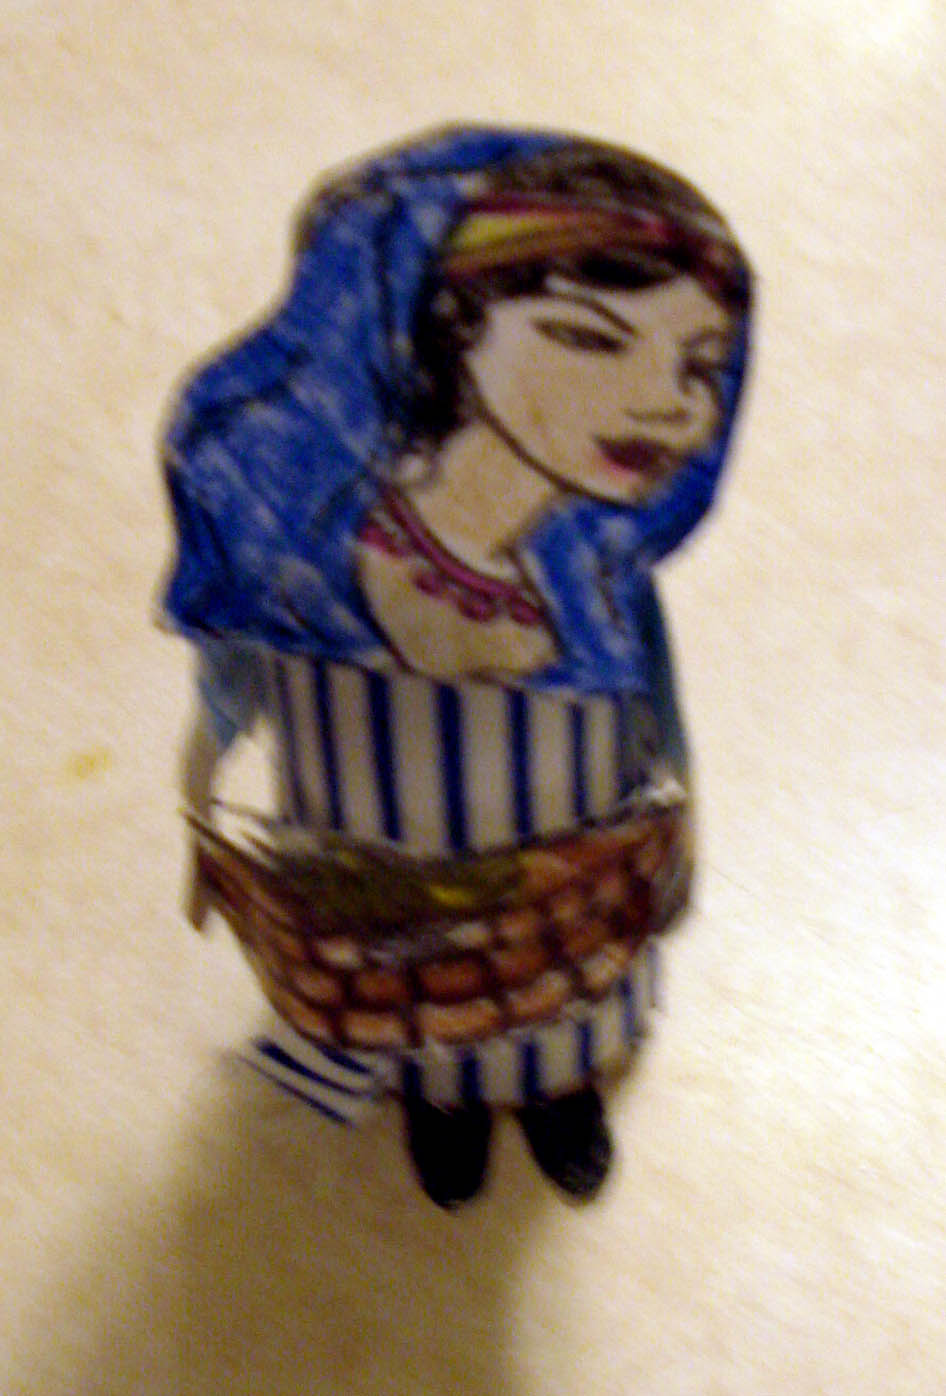 Craft Project for the Story of Ruth